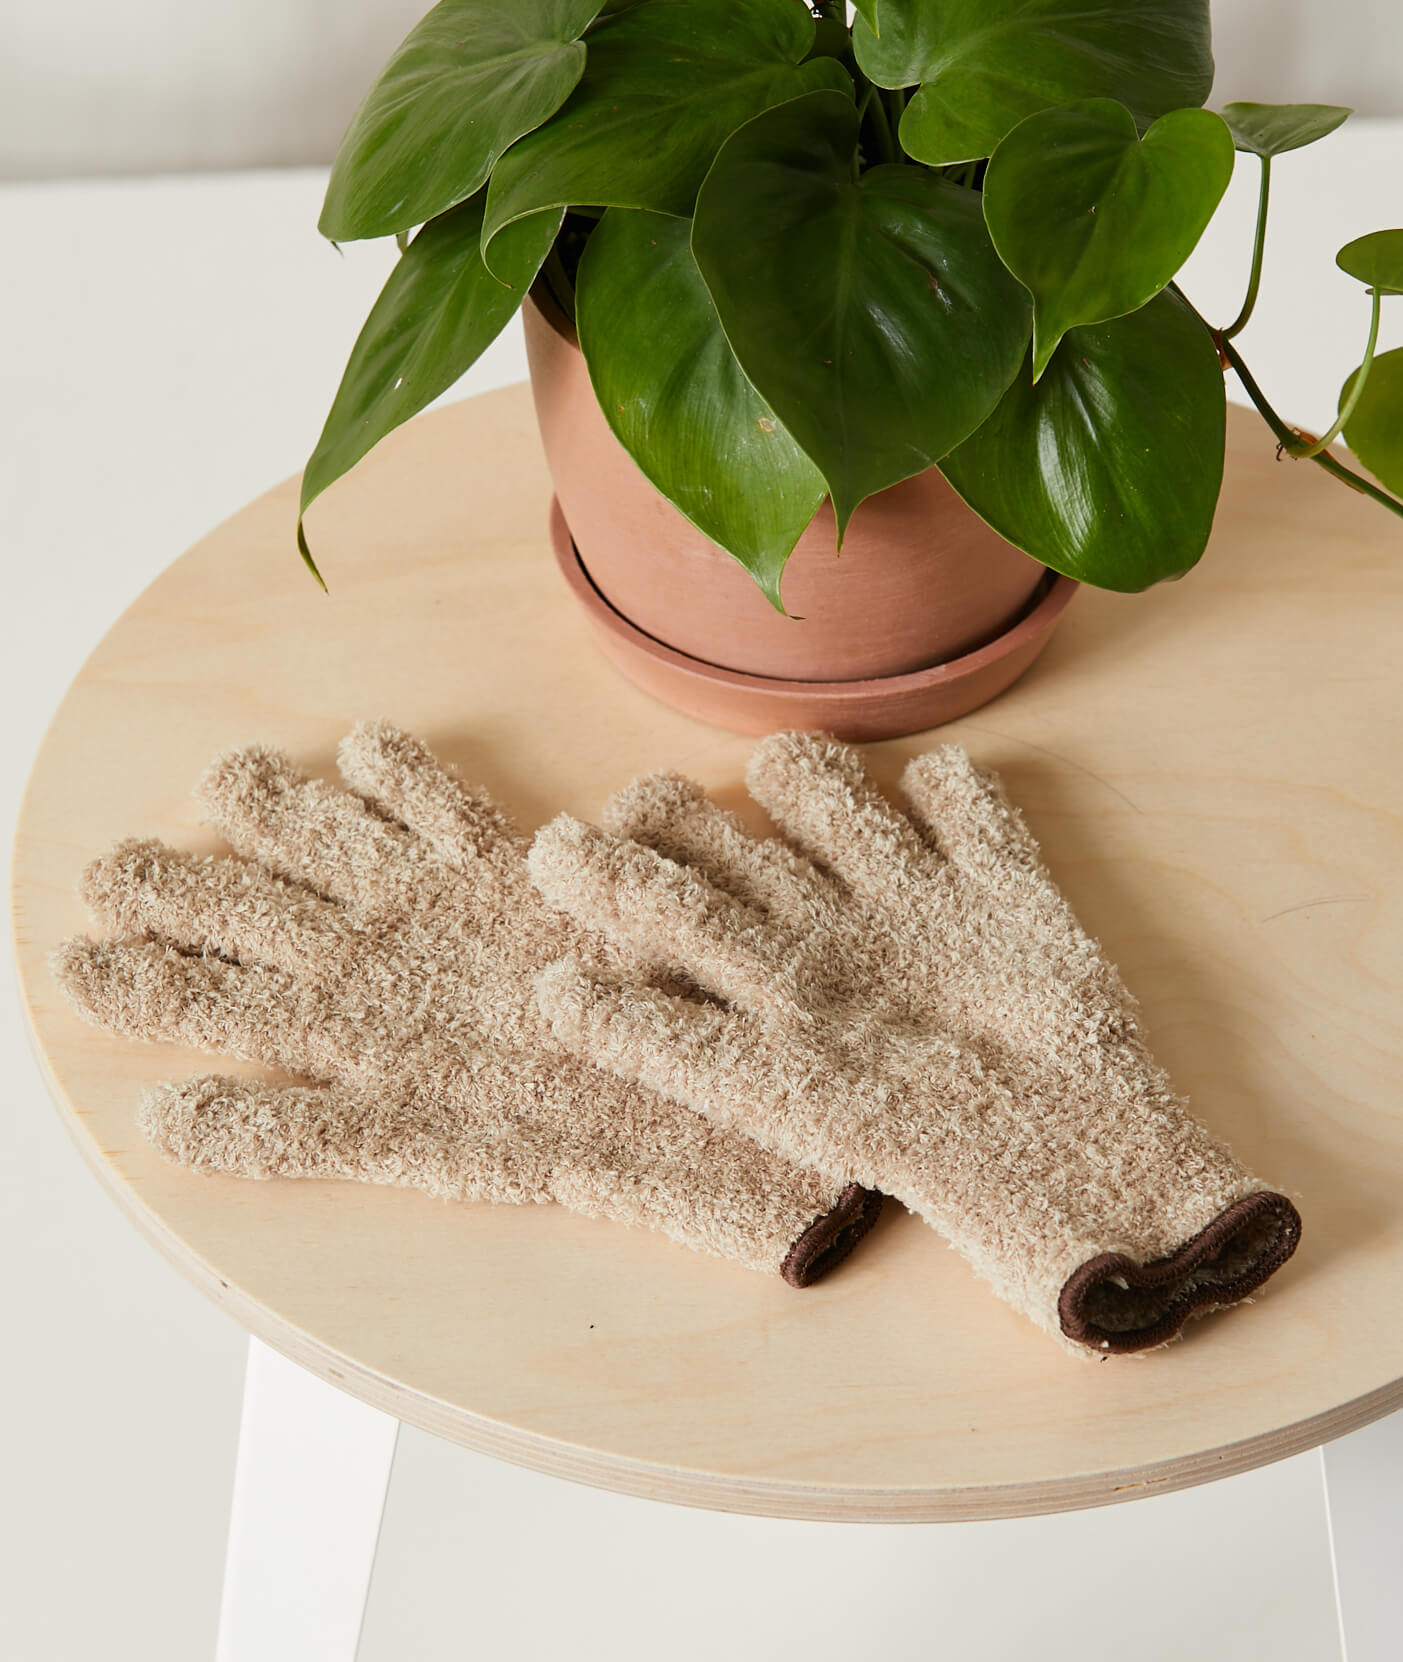 Unbiased plant tool review: Plant dusting gloves